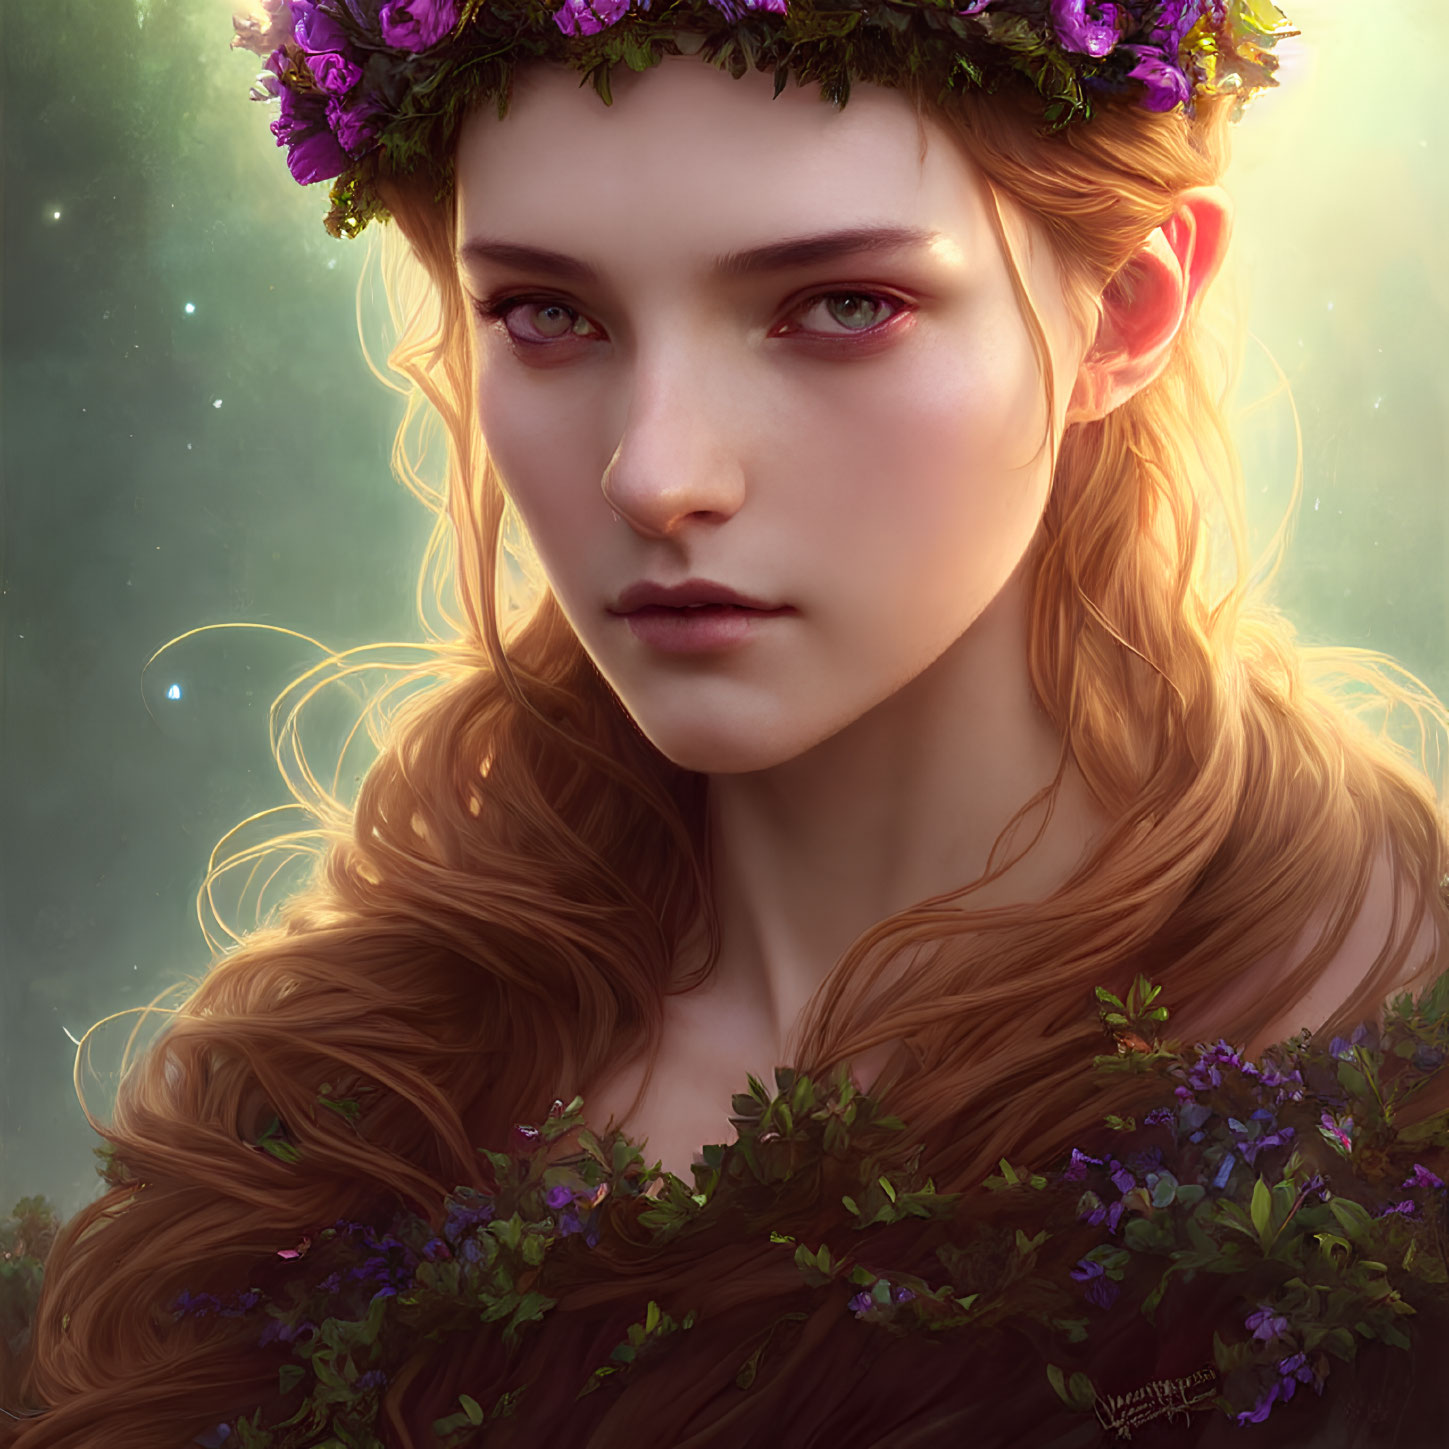 Fantasy portrait of woman with pointed ears and floral crown